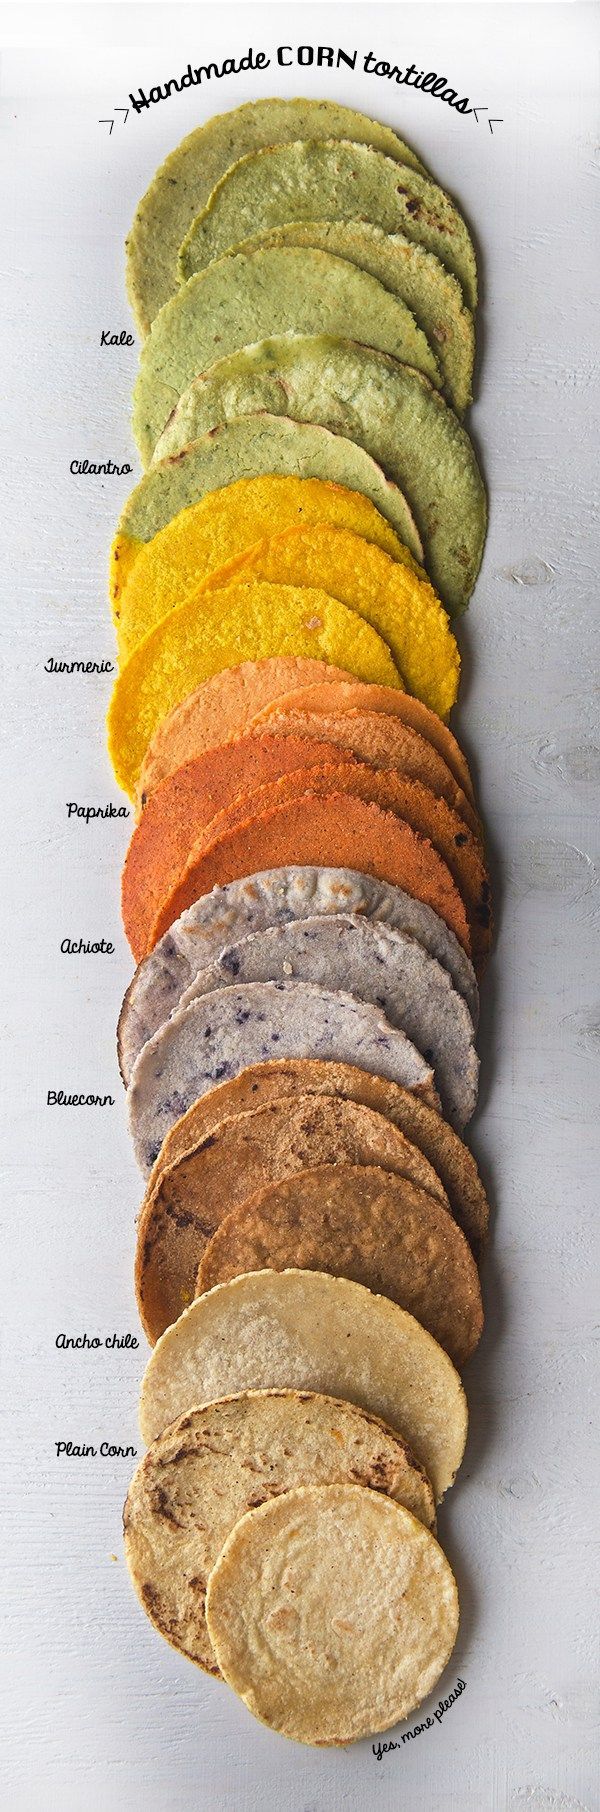 Handmade Corn Tortillas – Step-by-step instructions for eight different flavors!